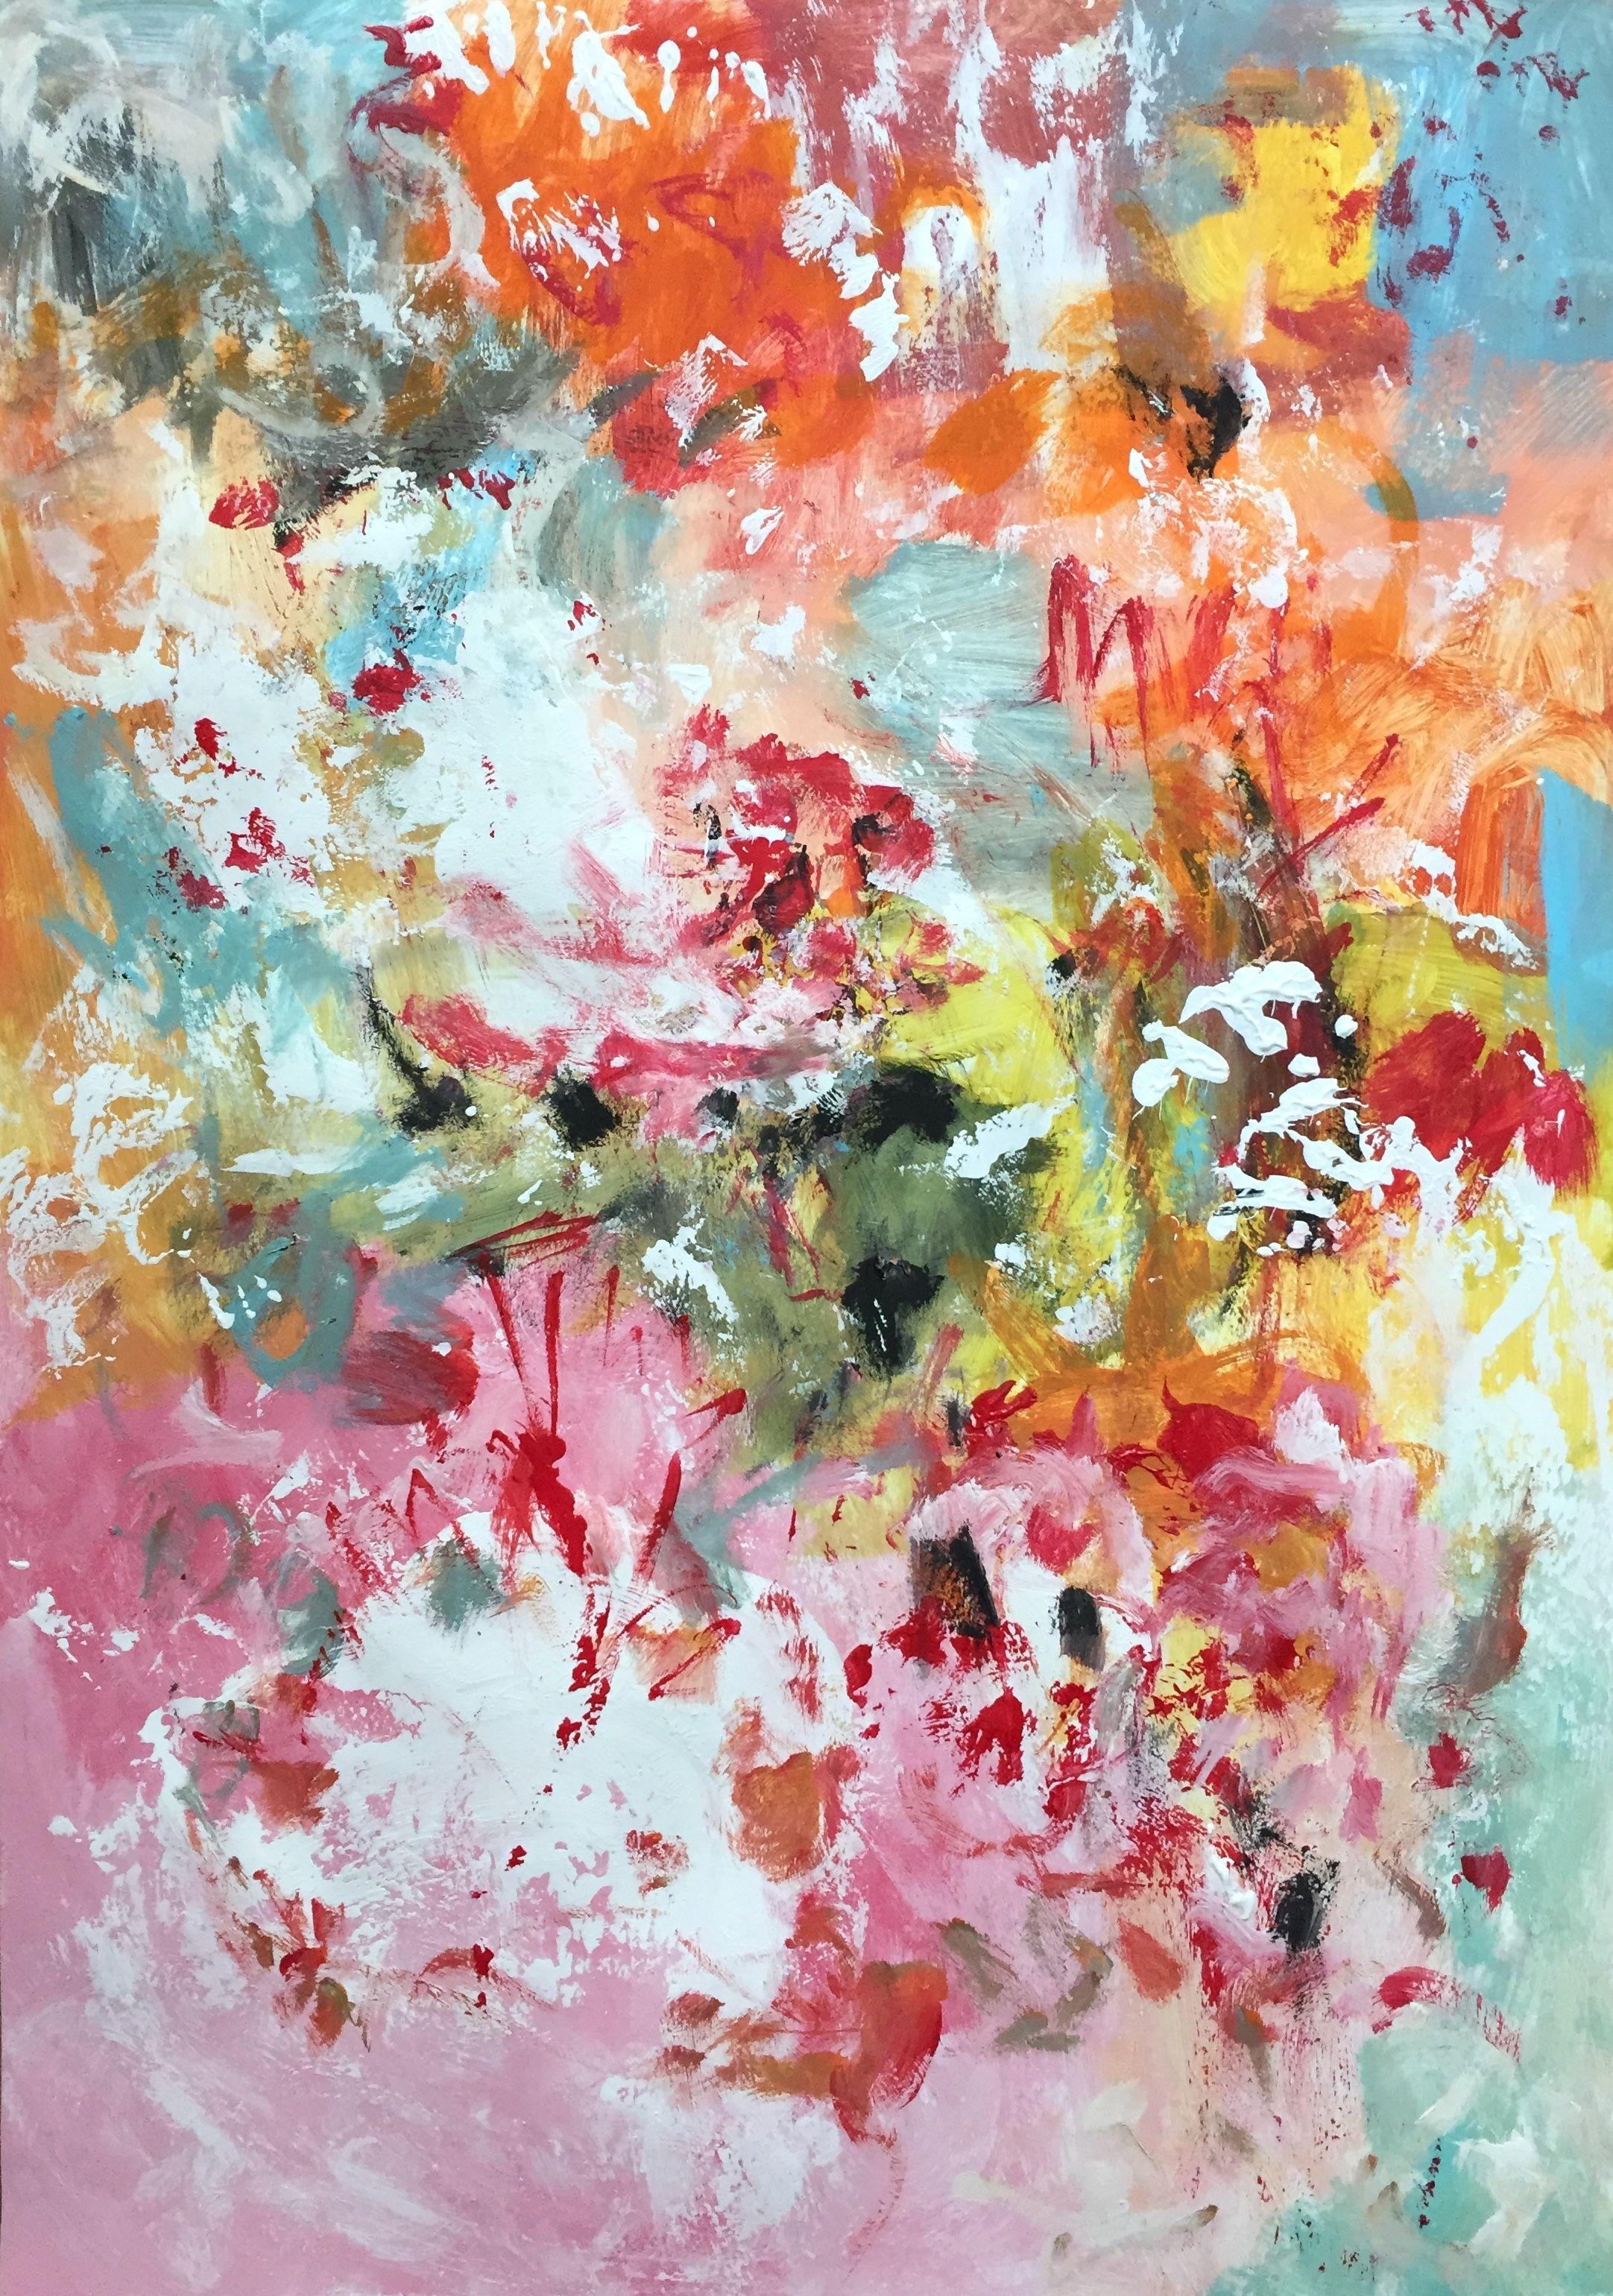 "Nice to Meet You" is a colorful acrylic painting on thick high quality paper. It is painted gestural and dynamic. The choice of colors is positive, bright and creates a good mood - a happy painting. It is reminiscent of flowers, blossoms, spring,